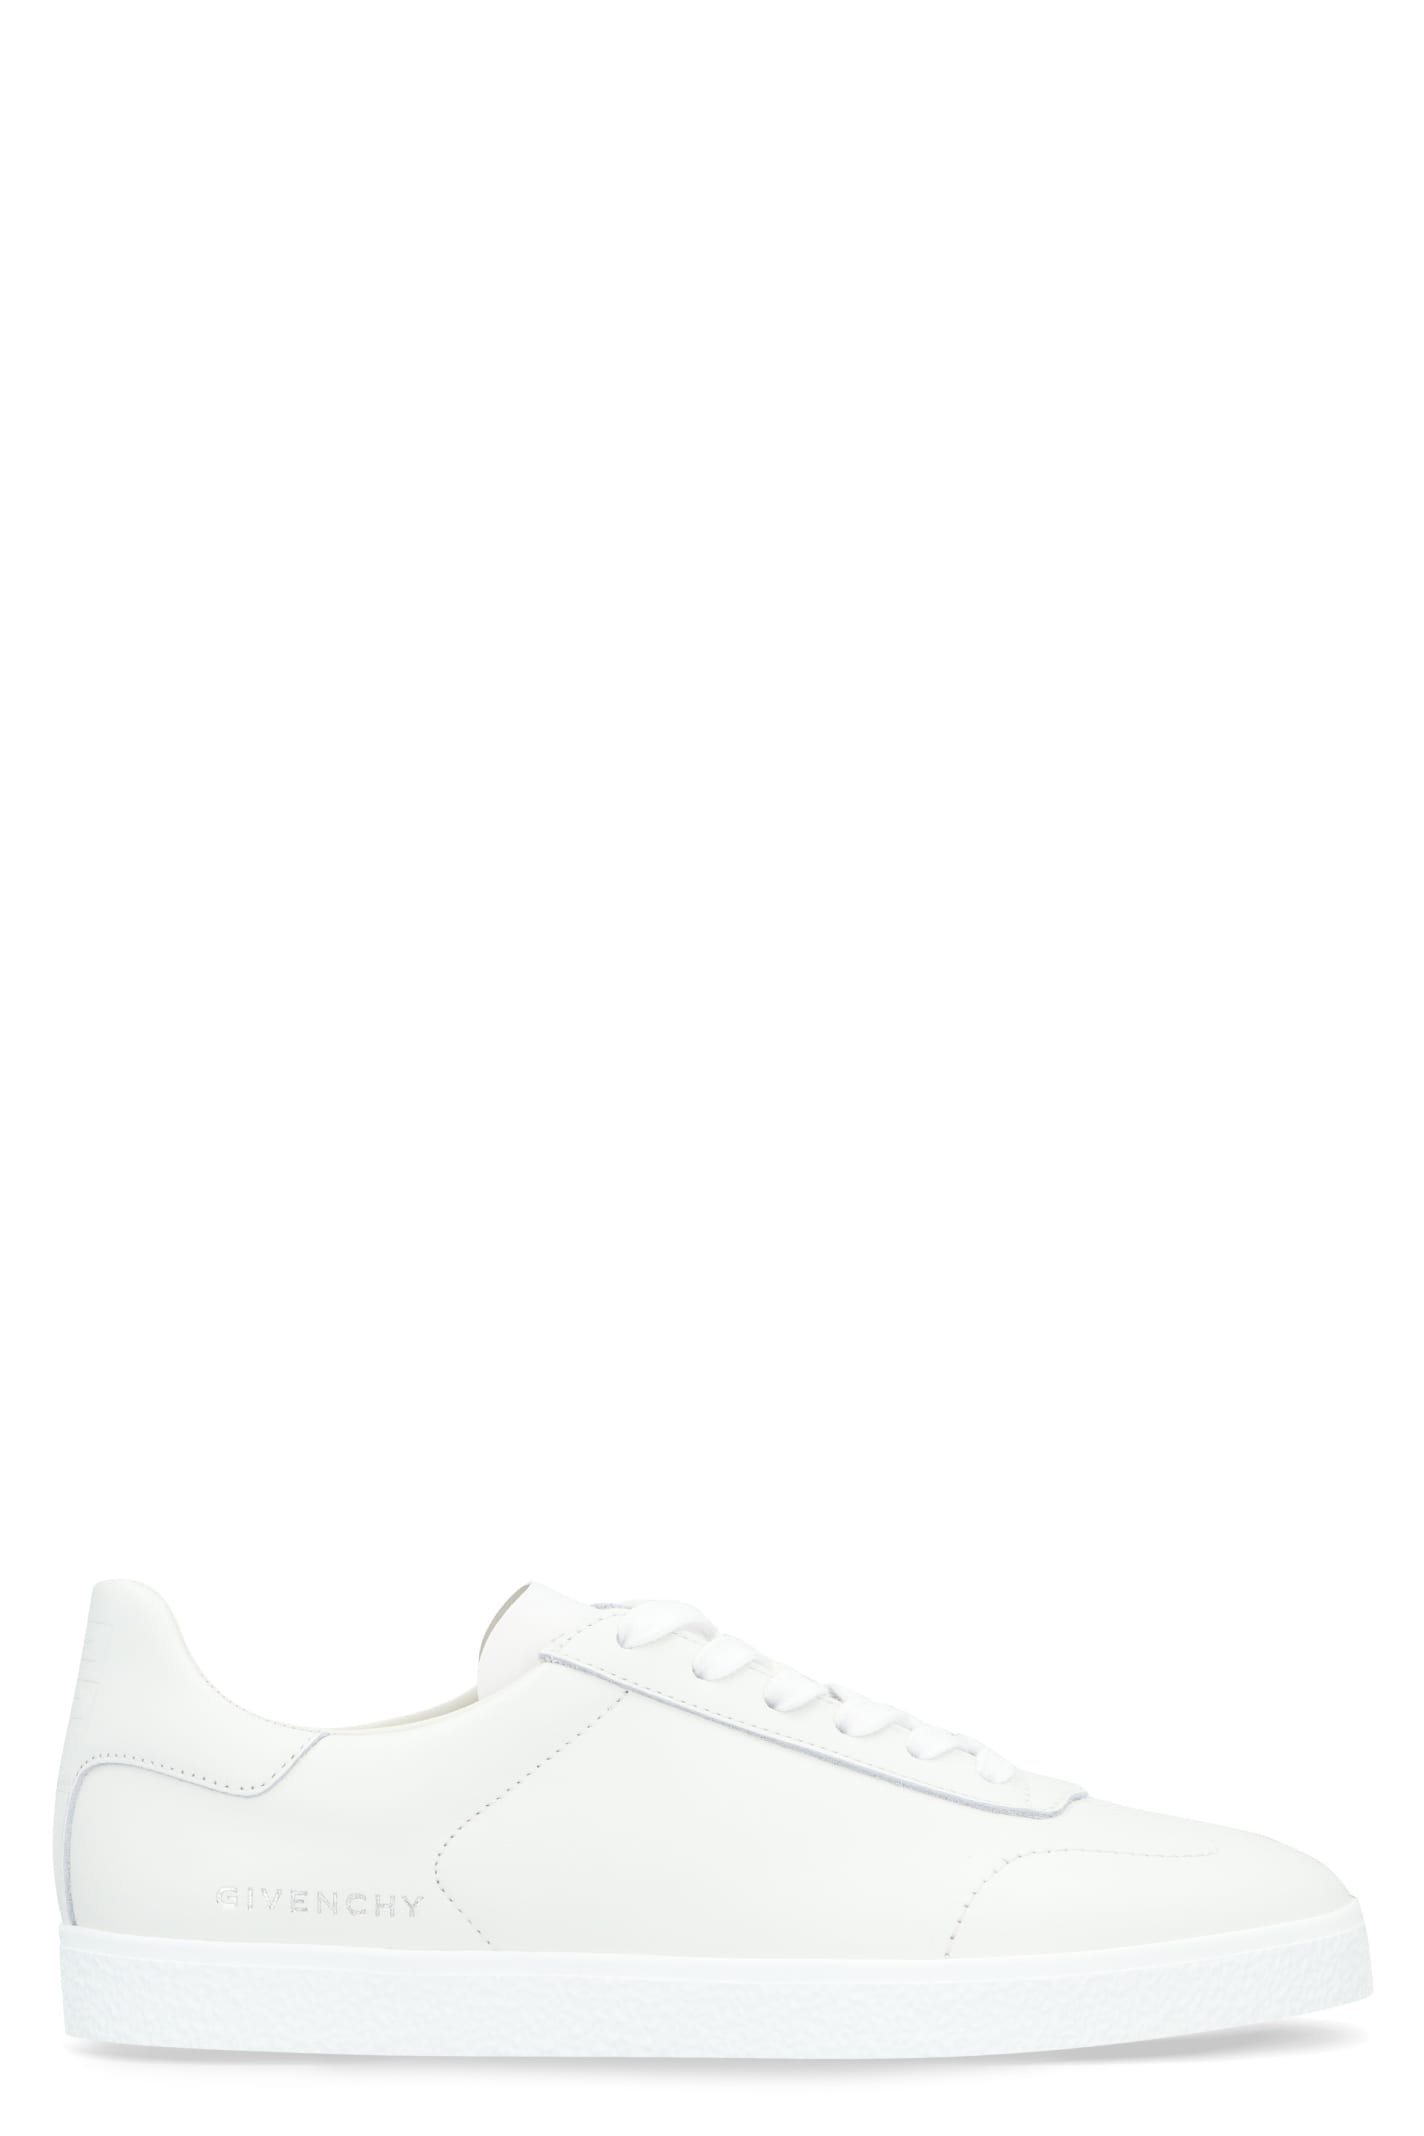 GIVENCHY TOWN LEATHER LOW-TOP SNEAKERS